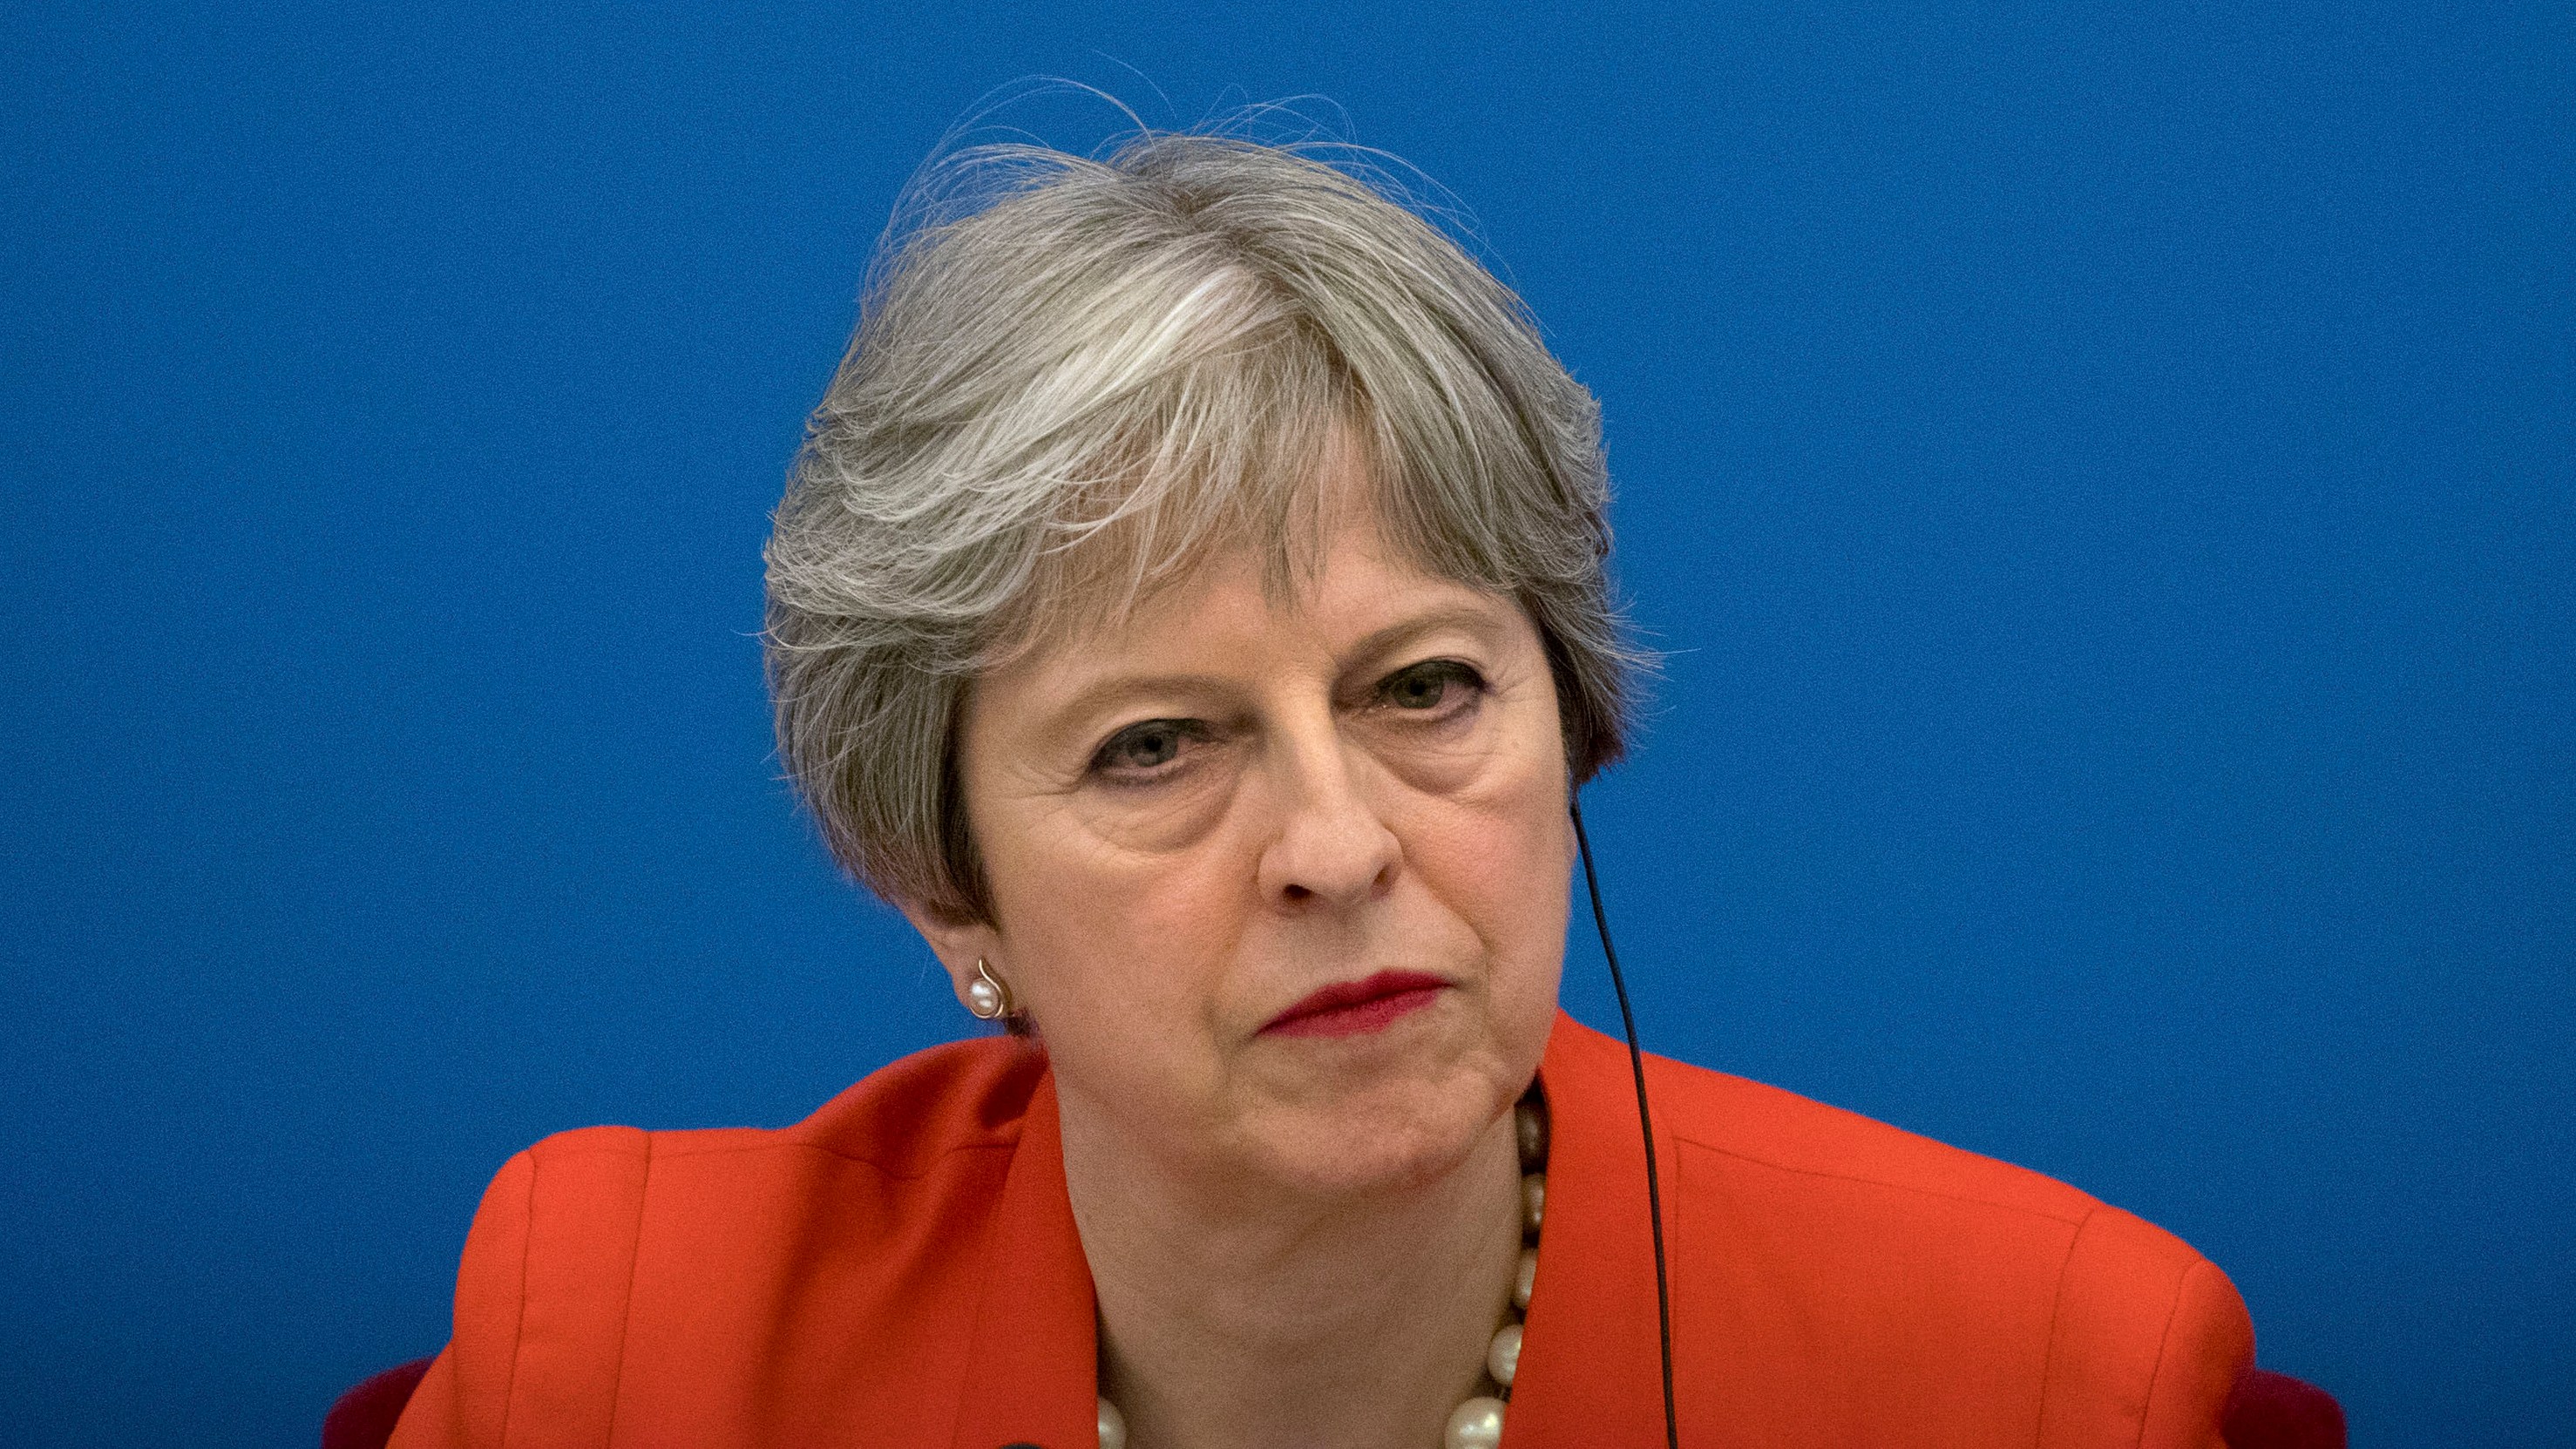 Theresa May had no Brexit deal negotiation strategy — beyond relentless stubbornness